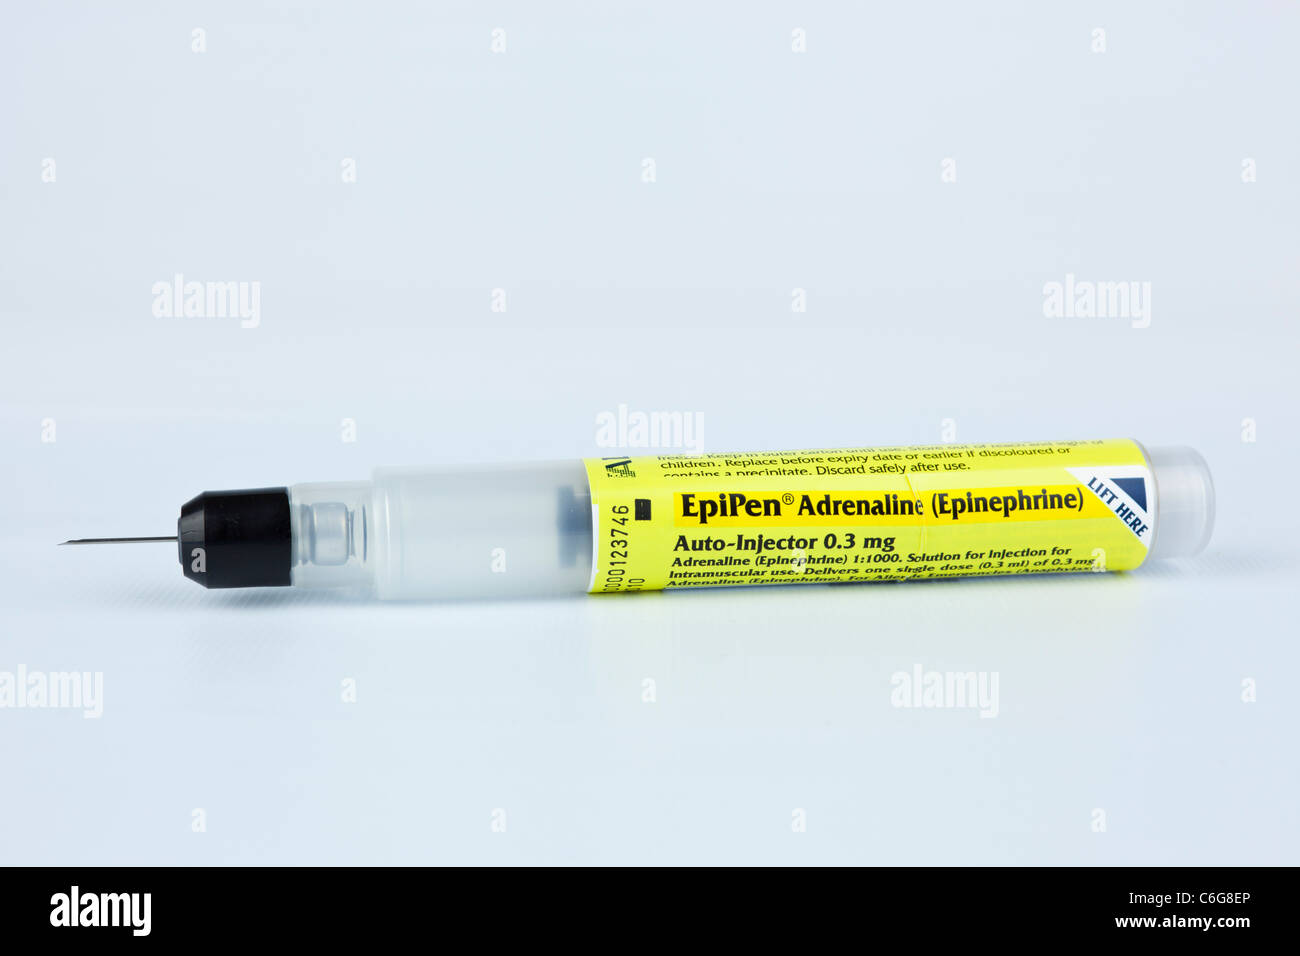 Epipen emergency adrenaline epinephrine injection pen for anaphylaxis treatment of allergic allergy reactions Stock Photo